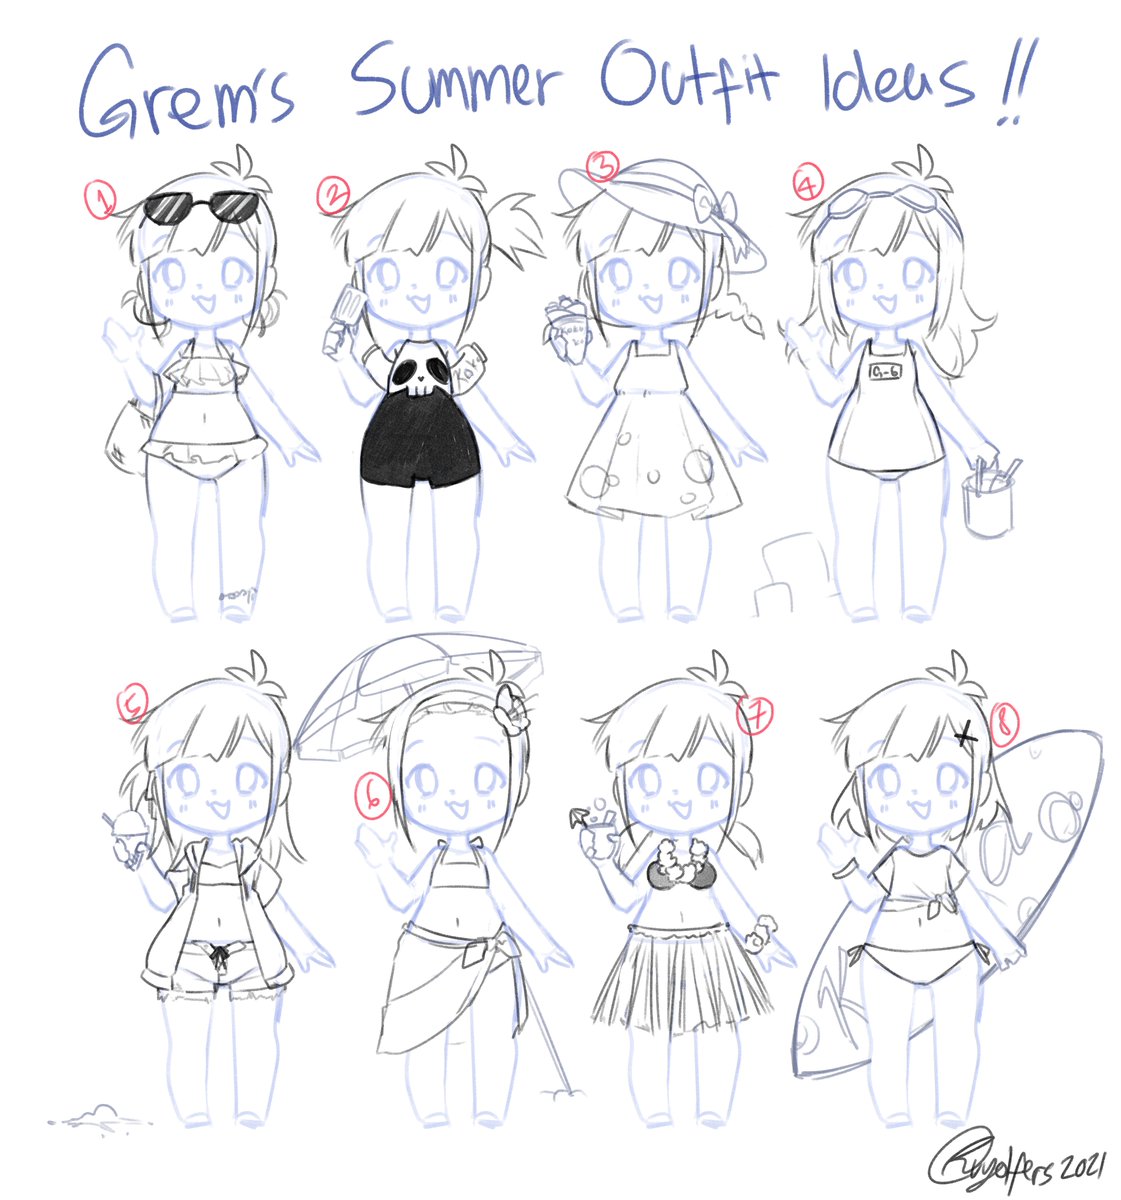 drew so many summer outfit ideas on stream! >w< which one is your favorite?~ owo 